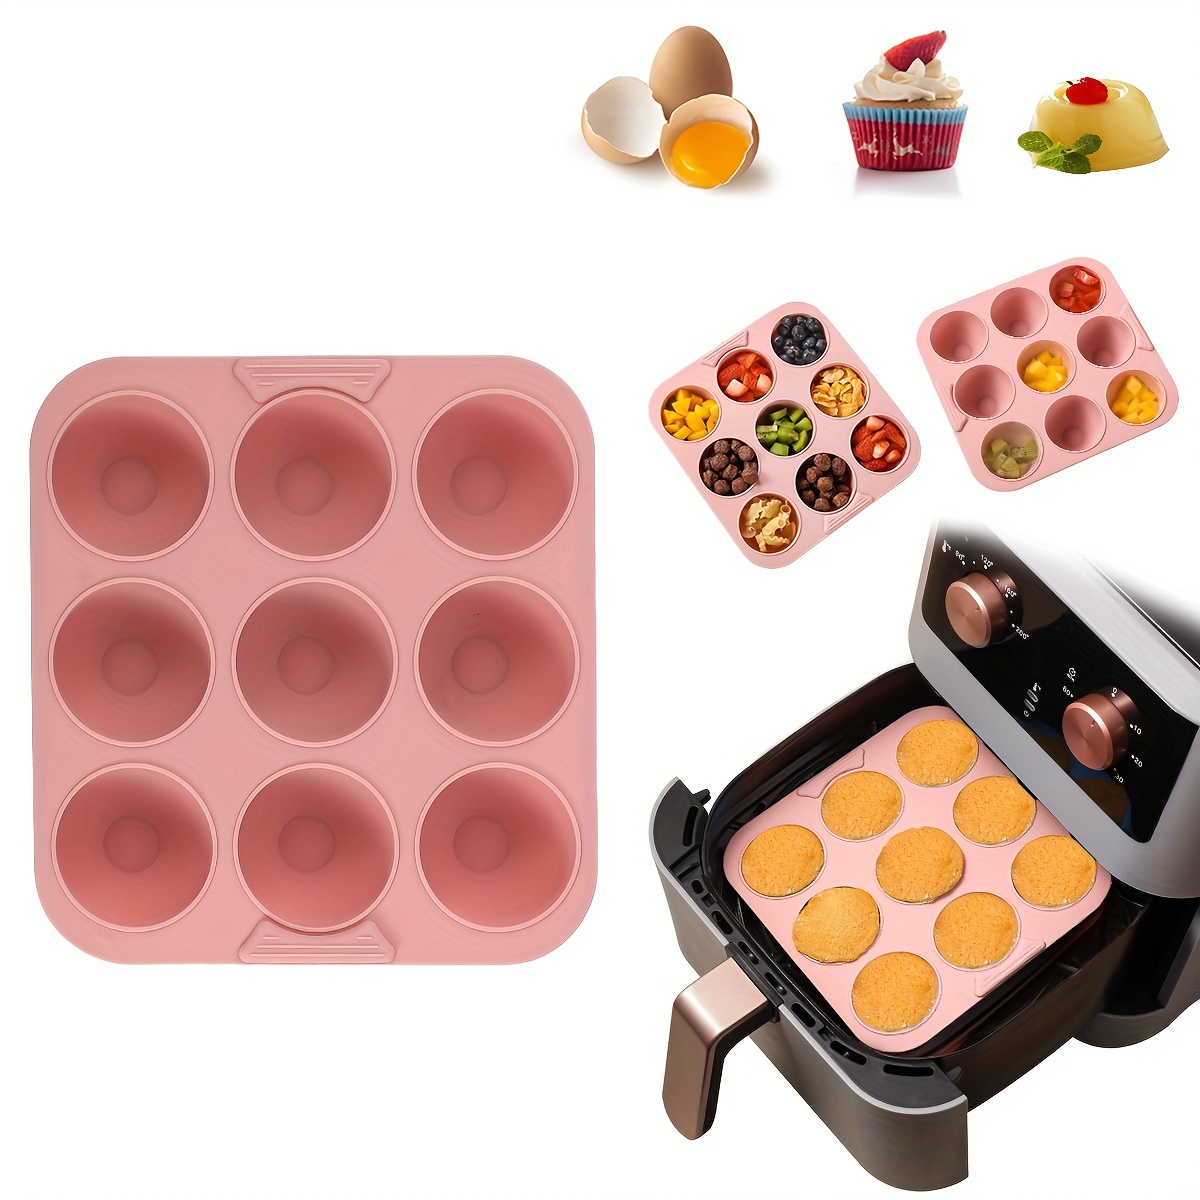 Square Cake Pop Mold Silicone, 2pcs 15 Cavity Cake Pops Molds for